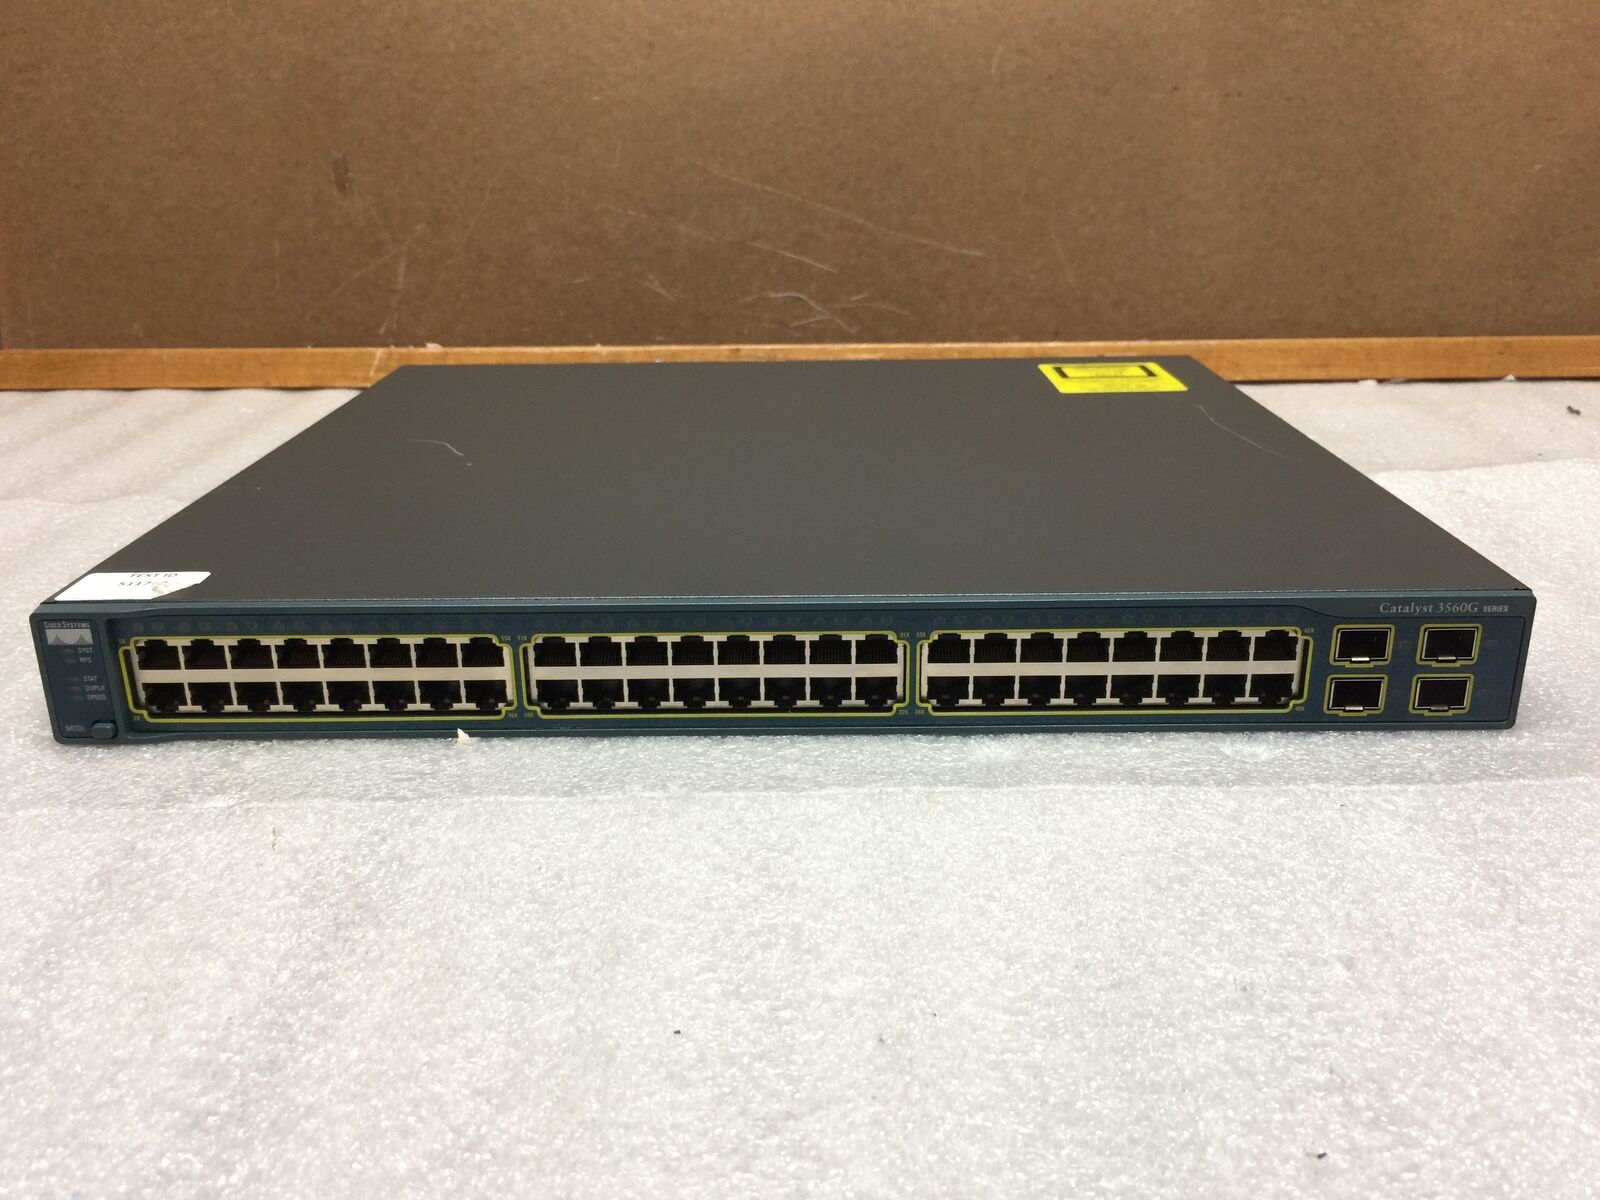 Cisco Catalyst 3560G Series WS-C3560G-48TS-S V03 48-Port Ethernet Switch, Tested